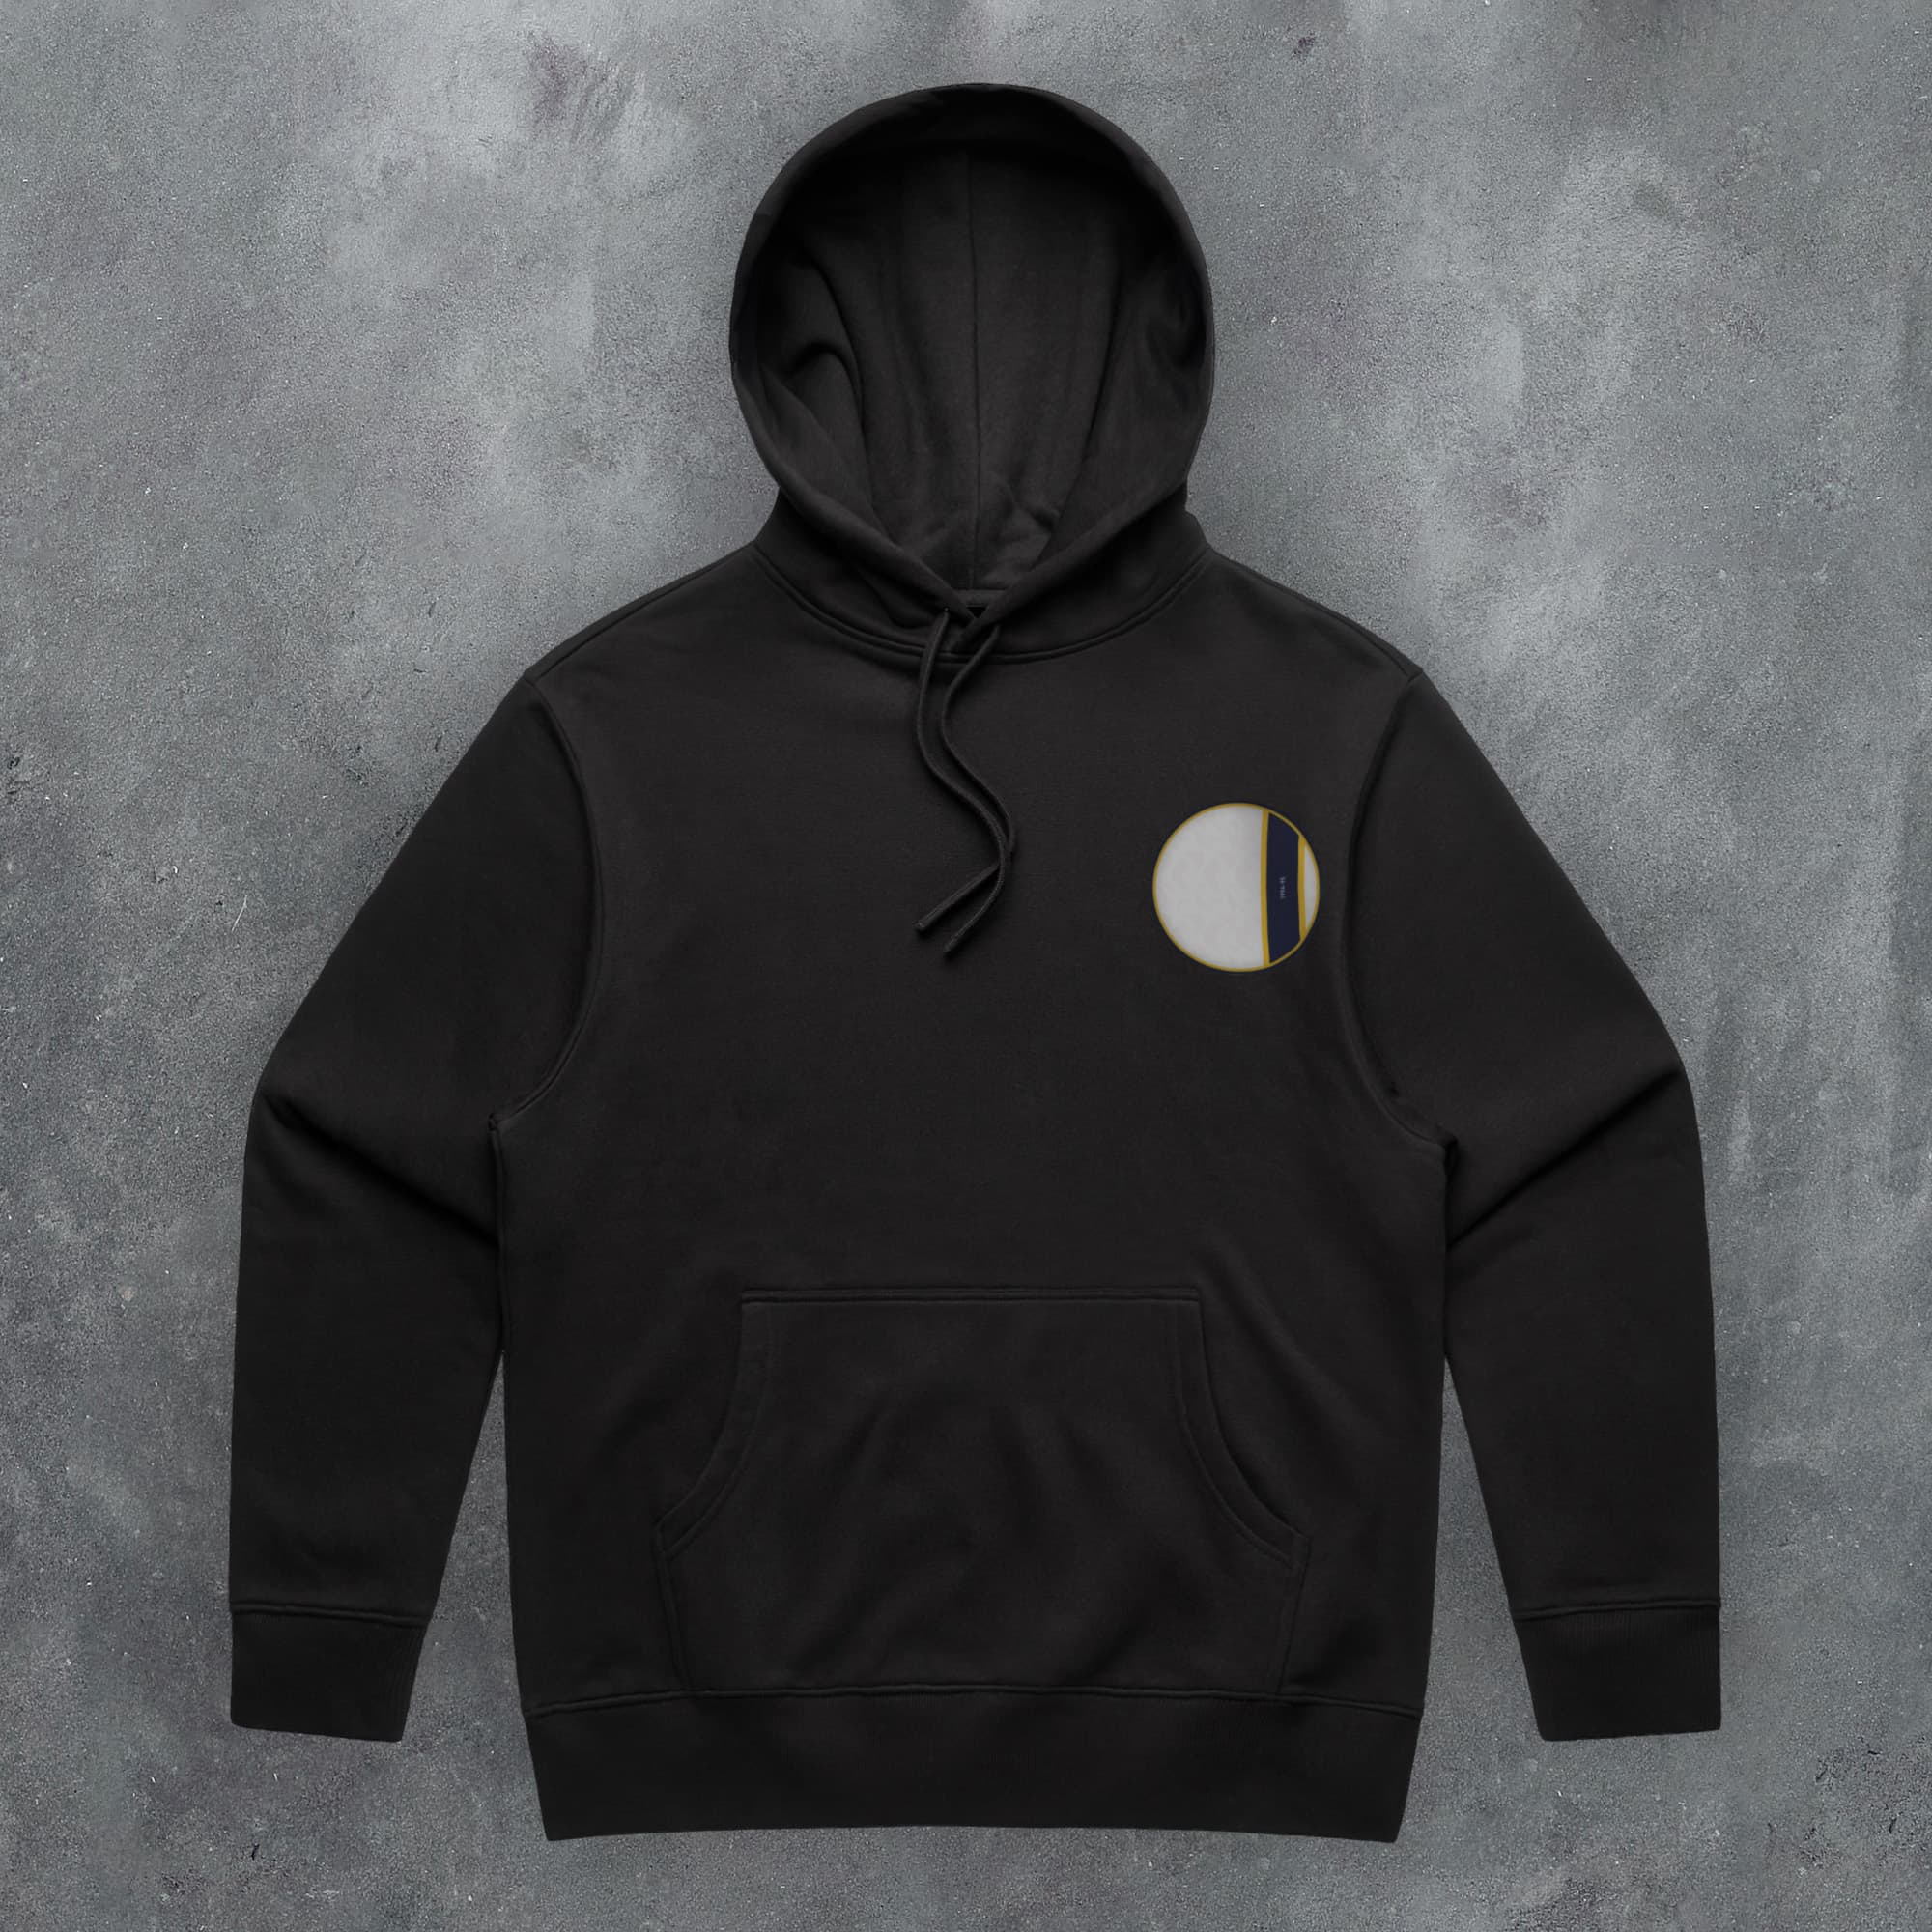 a black hoodie with a white circle on it